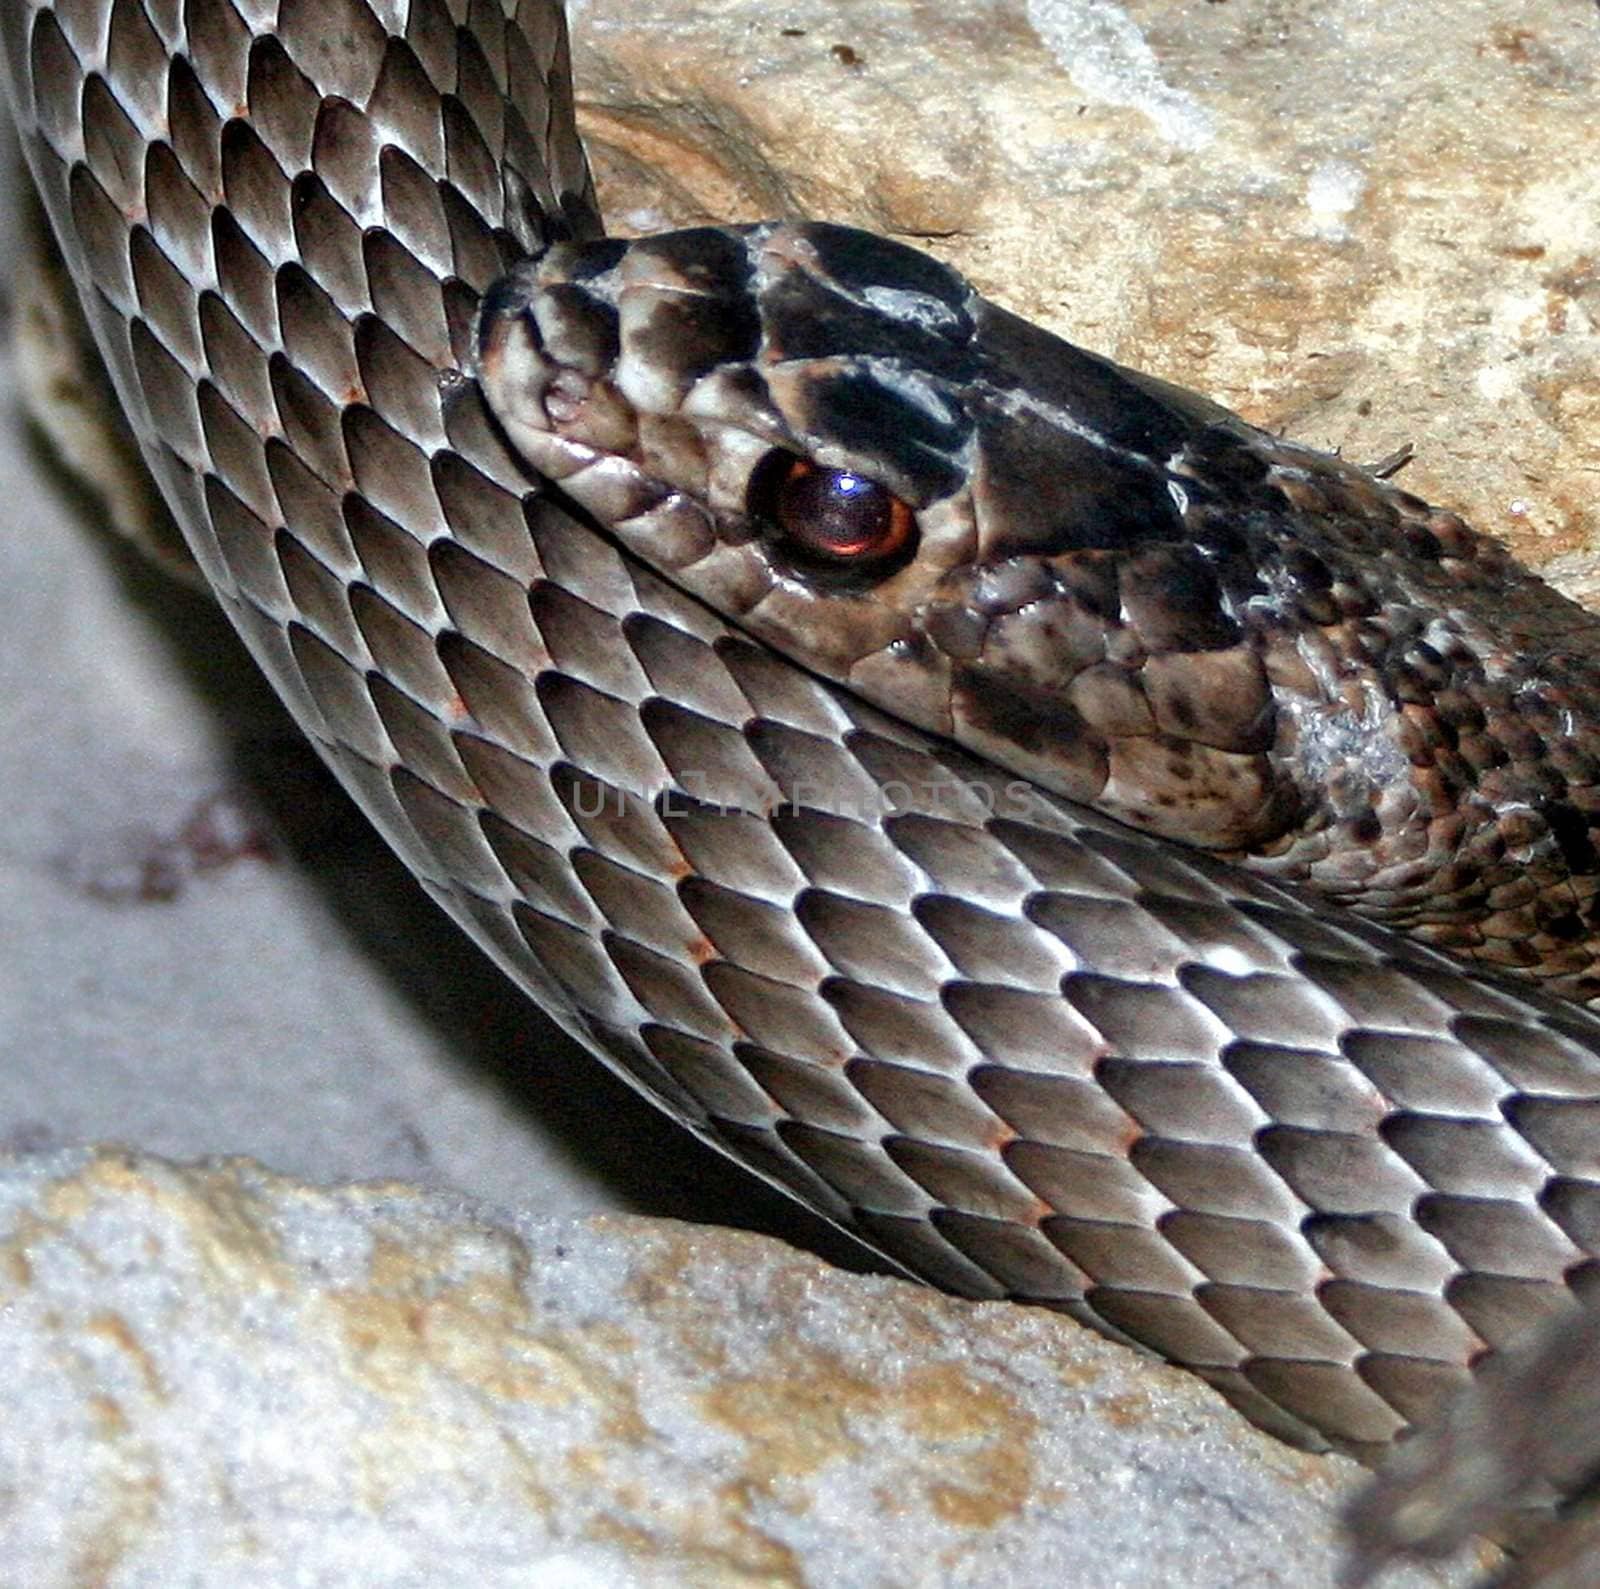 A snakes head leaning on its body.